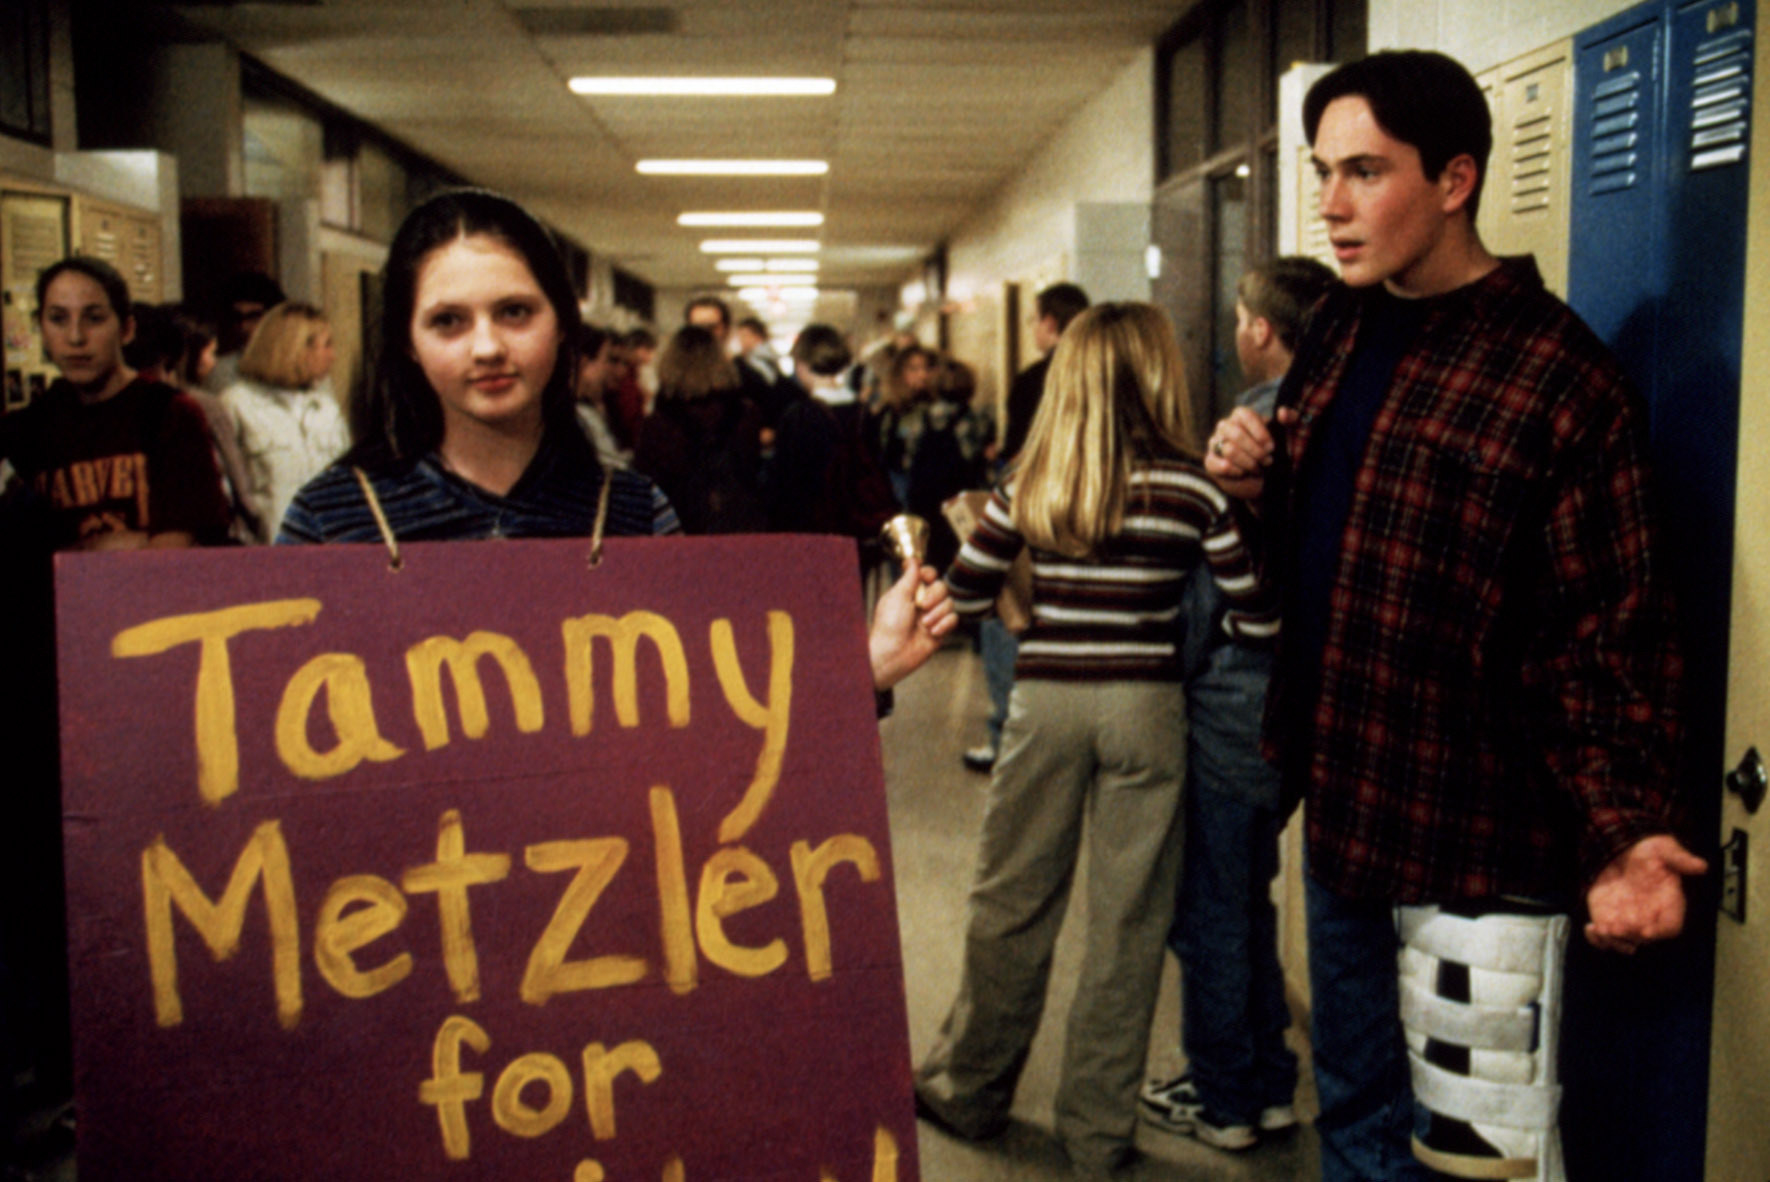 Jessica Campbell holds a campaign sign in the school hallway while Chris Klein looks on.